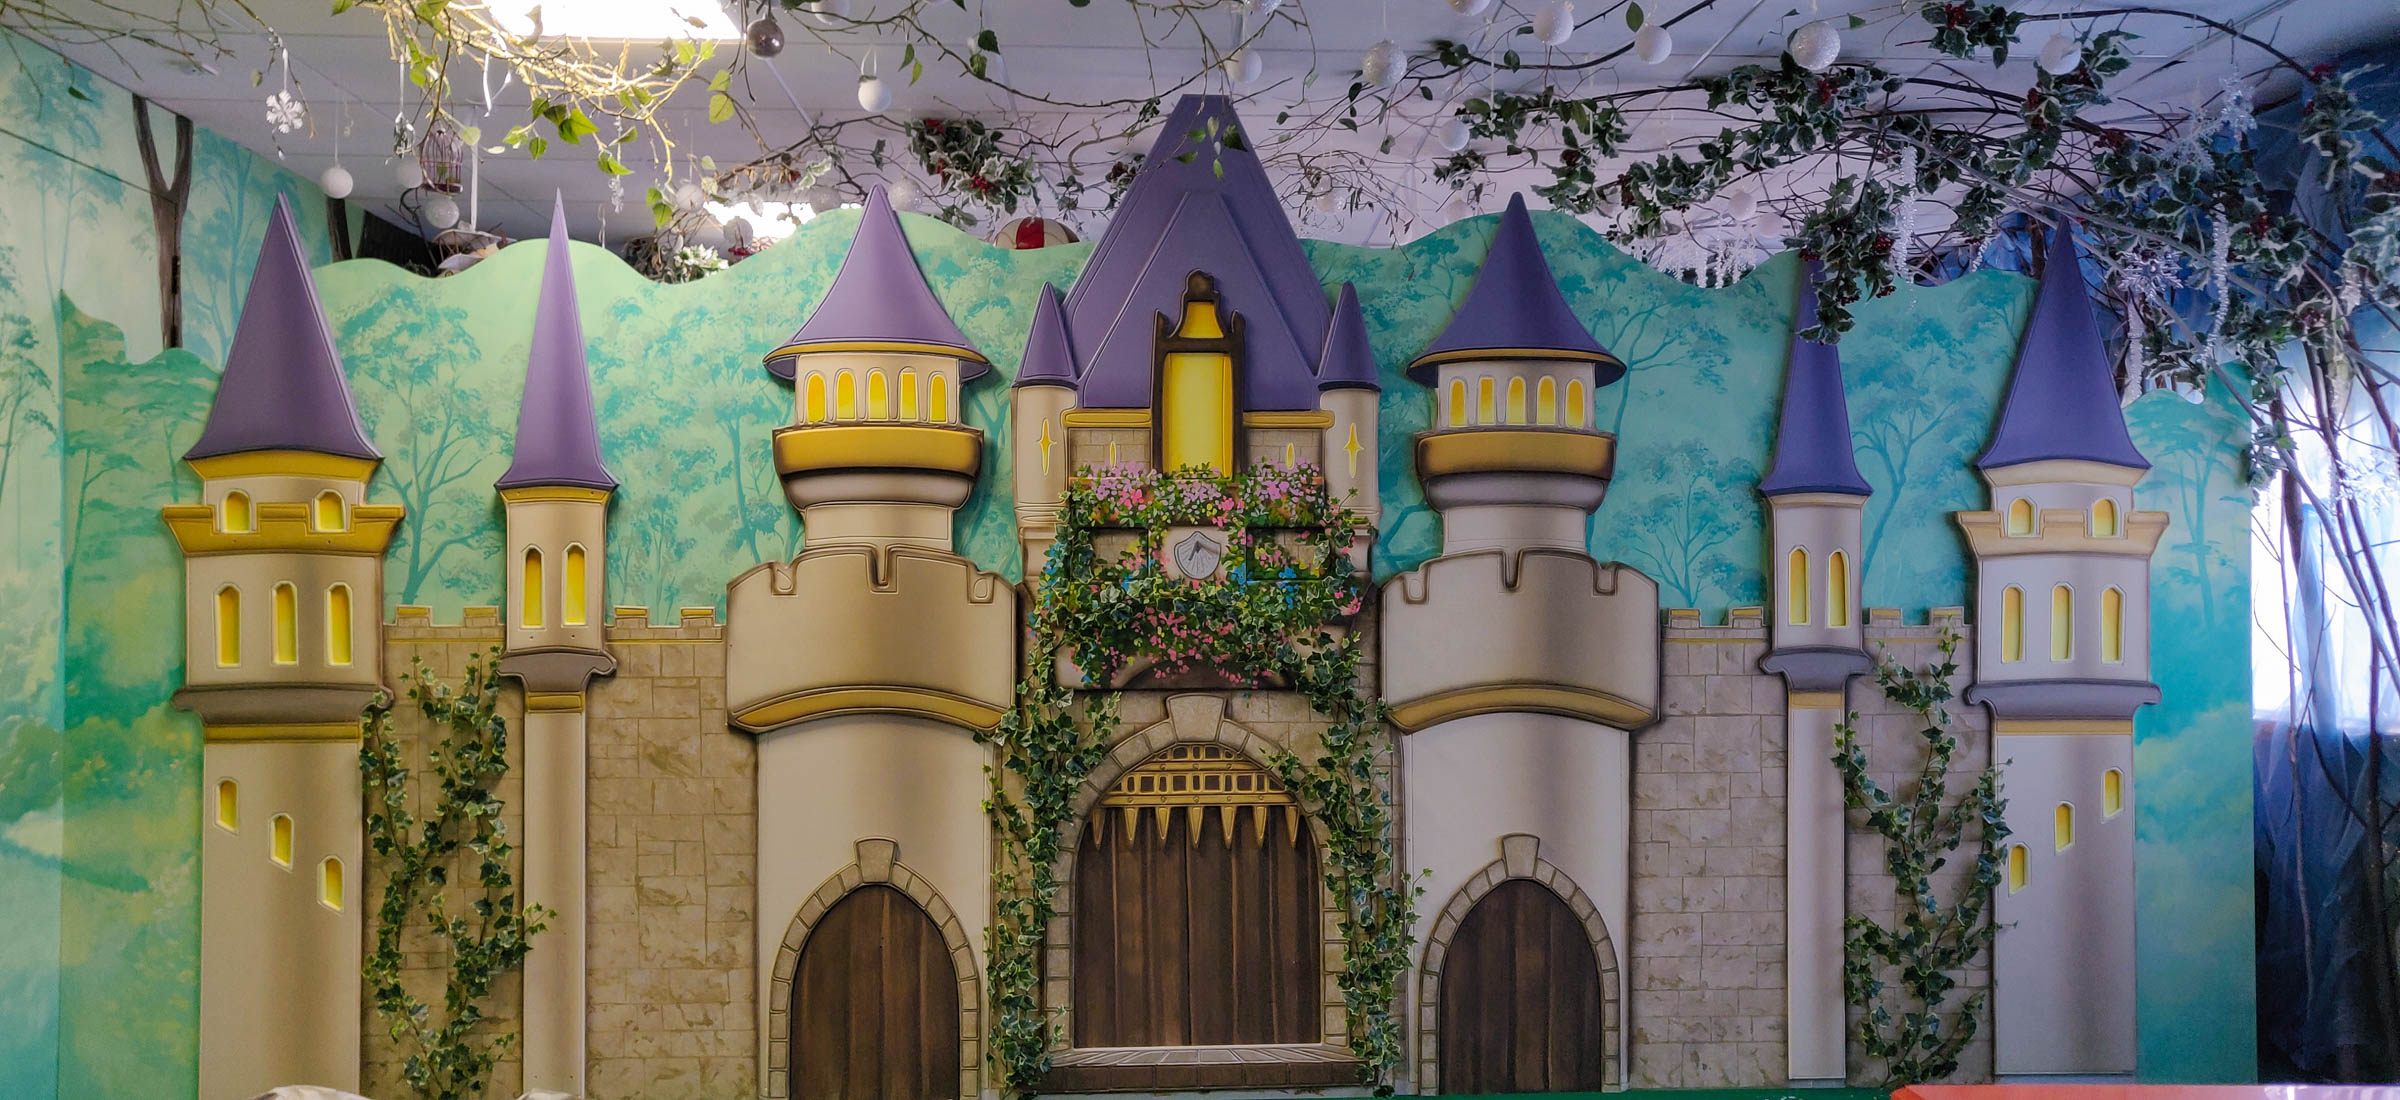 Impressive castle is the latest addition to this fabulous play room at the Riverside Hub